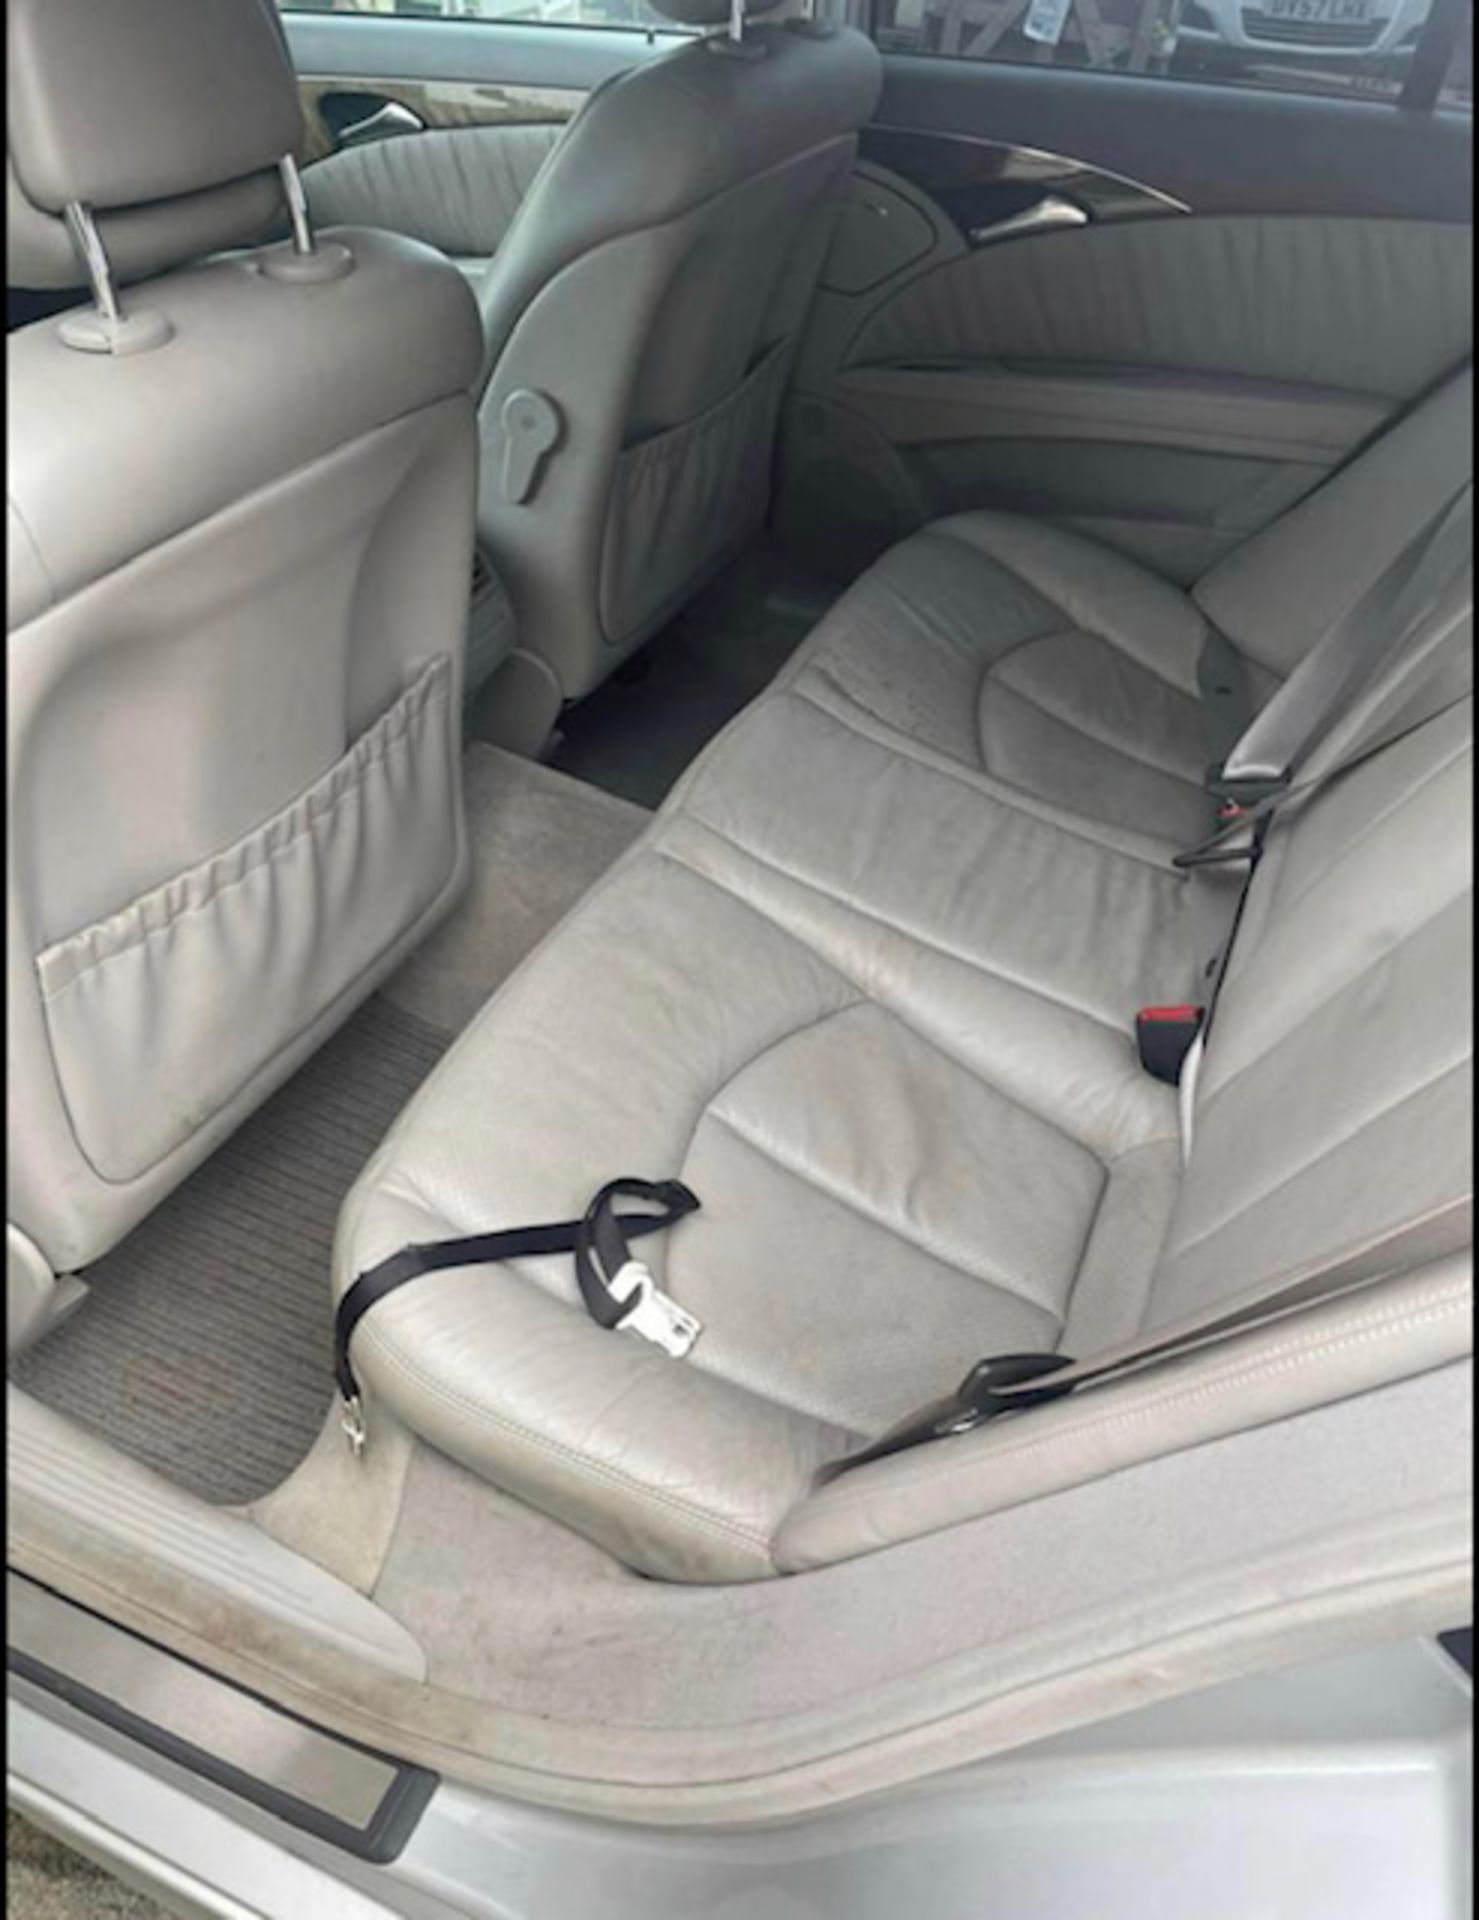 Mercedes E320 CDI 103k genuine miles ,as per pictures has scratches as shown in photos but is all in - Image 12 of 14